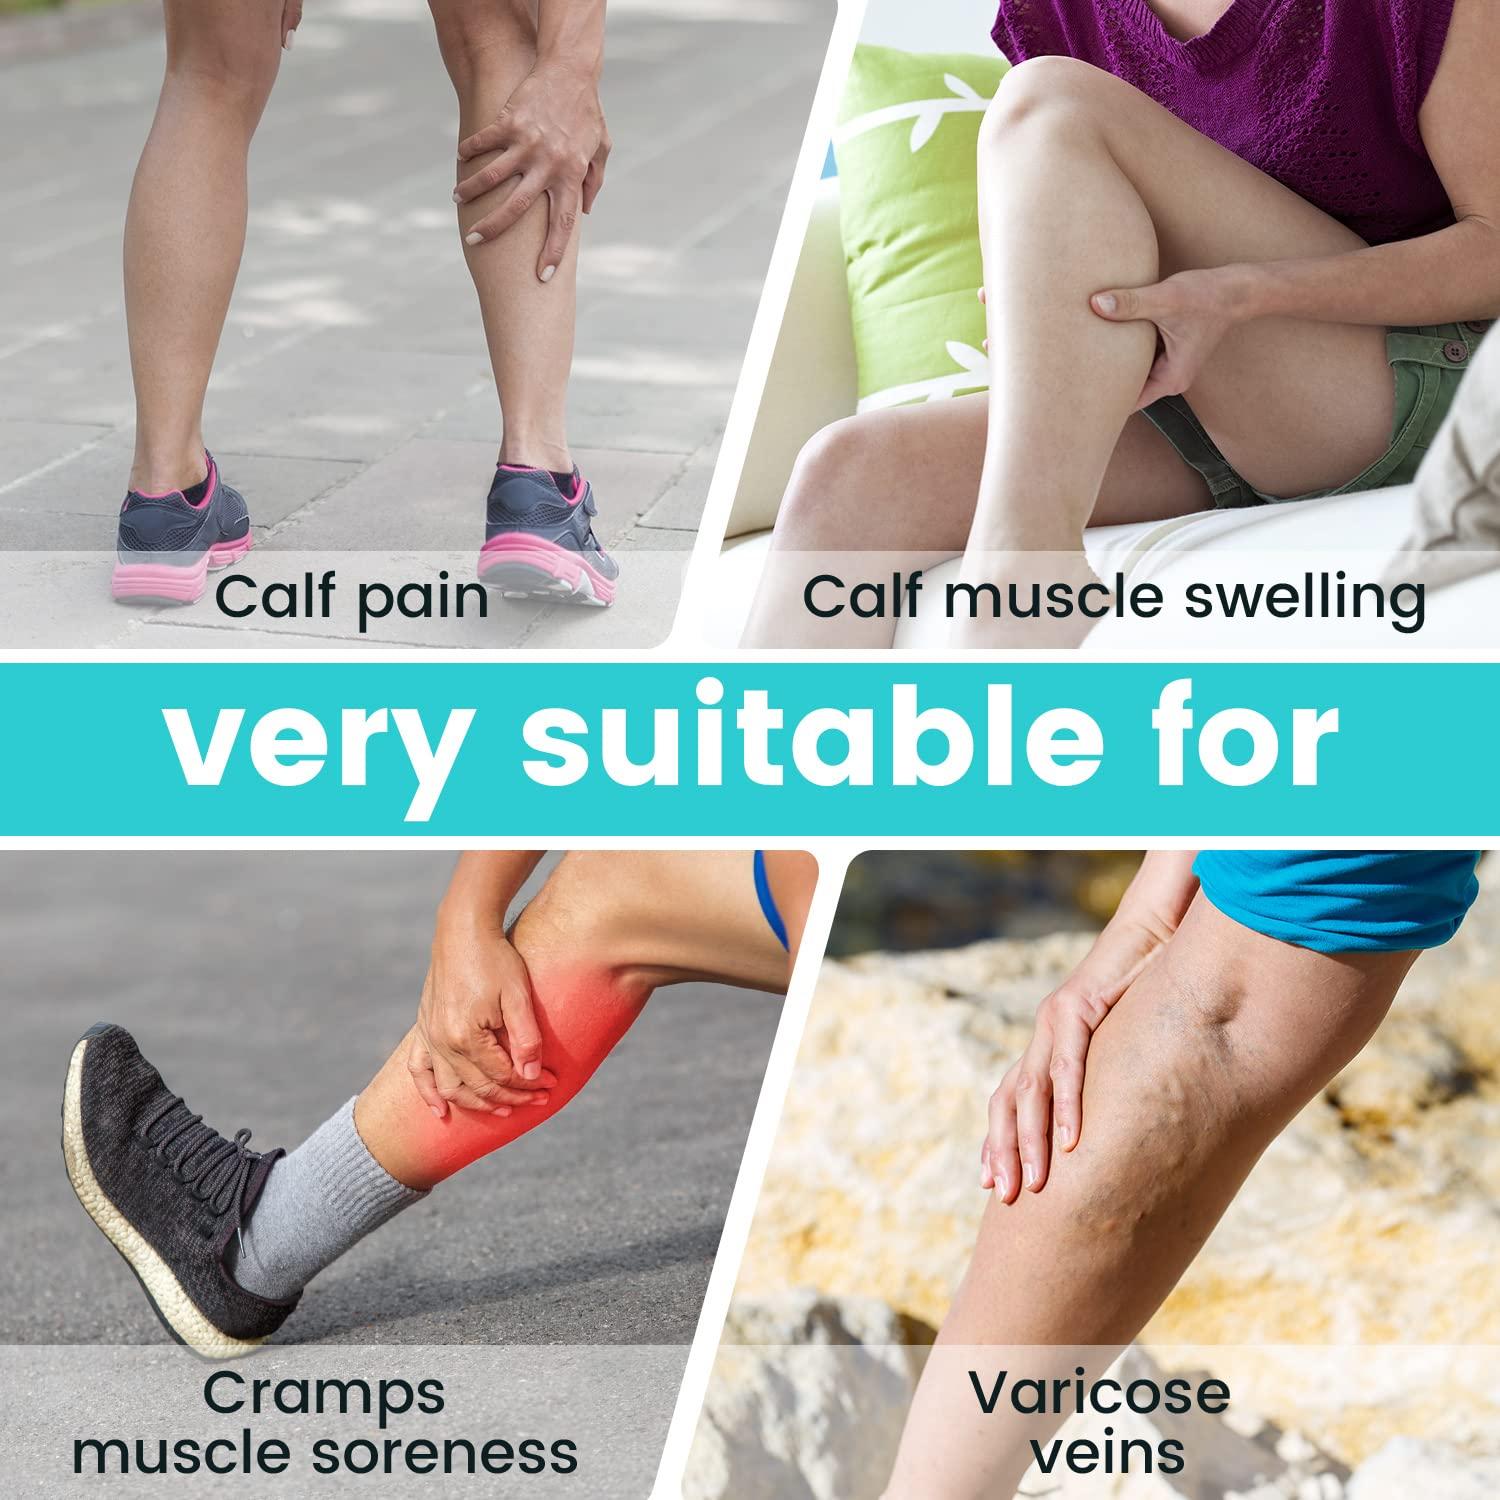  Calf Brace Leg Compression Sleeves For Men & Women, Shin  Splints For Calf Muscle Wrap, Diamond-shaped Elastic Band For Pressure, Fit  Swelling, Varicose Vein Pain Relief, Running, Fitness